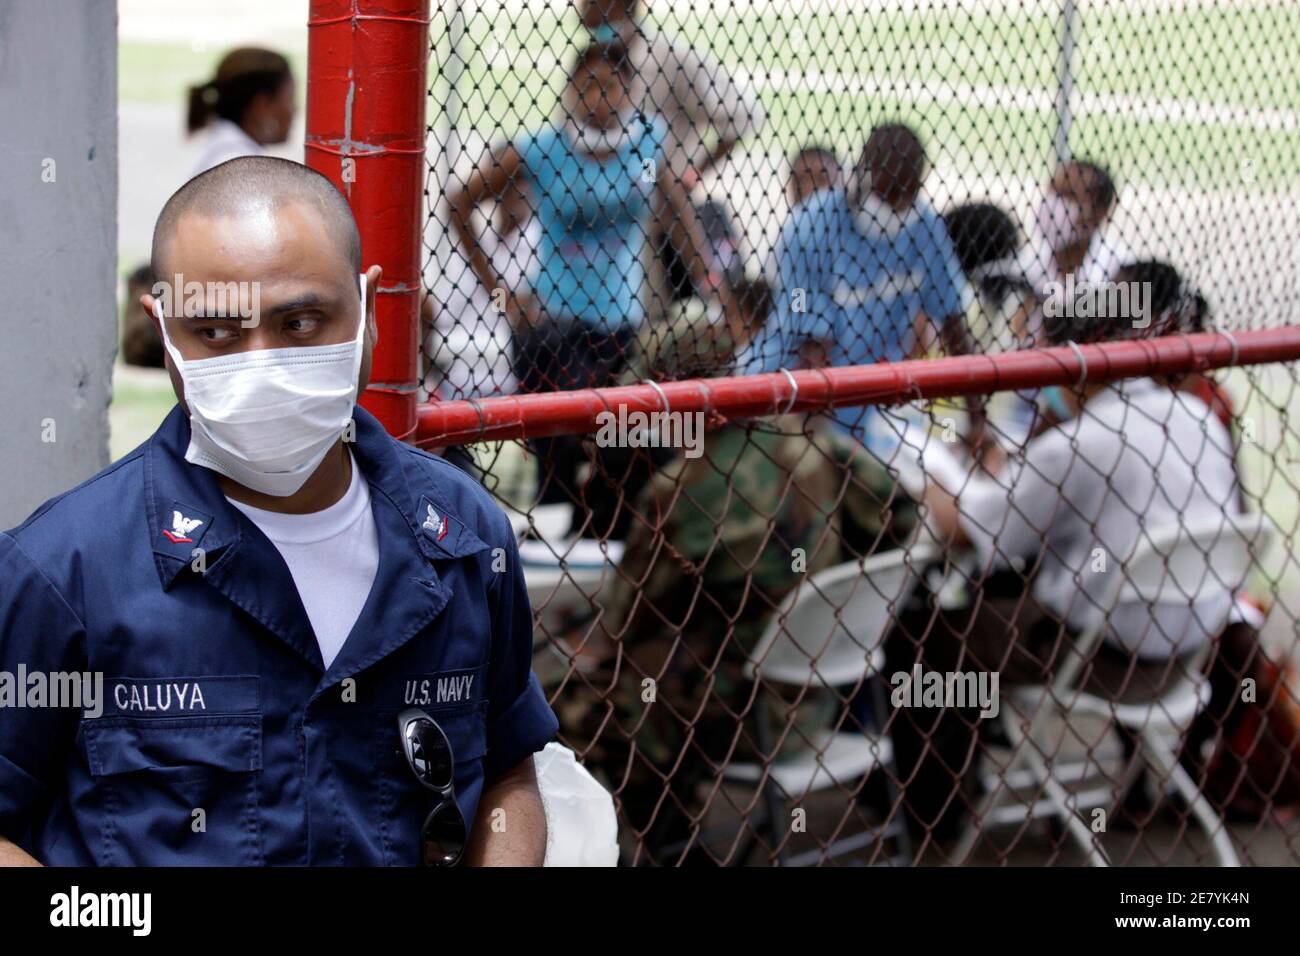 A U.S. Navy officer from the USNS Comfort hospital ship stands outside a stadium gate where patients with symptoms of the influenza A H1N1 virus are being treated in Colon City, May 28, 2009. Panama's health department announced that the total number of people infected had risen to 107. REUTERS/Alberto Lowe (PANAMA SOCIETY HEALTH MILITARY) Stock Photo